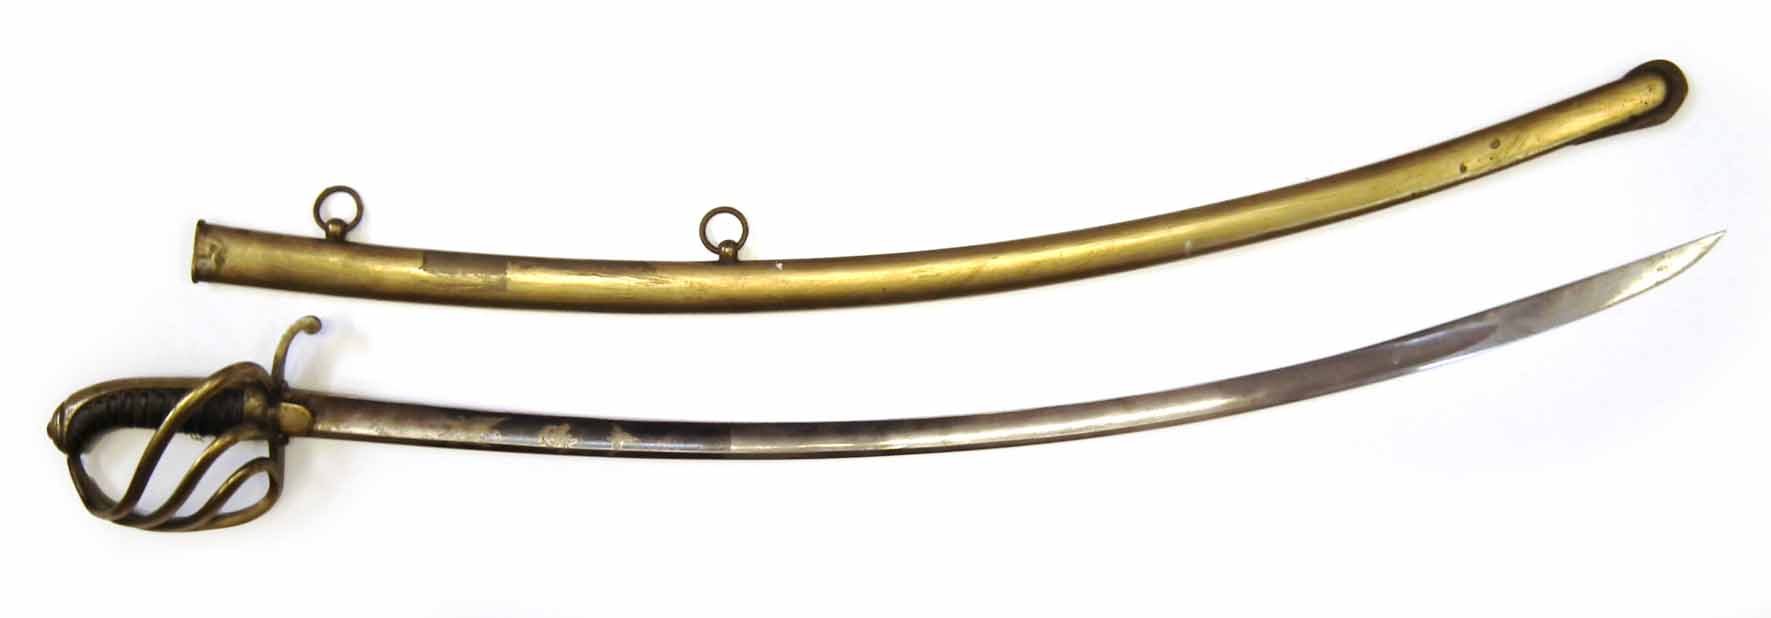 1822 type Cavalry sabre by Weyersberg Solingen, with etched blue and gilt blade, brass guard and